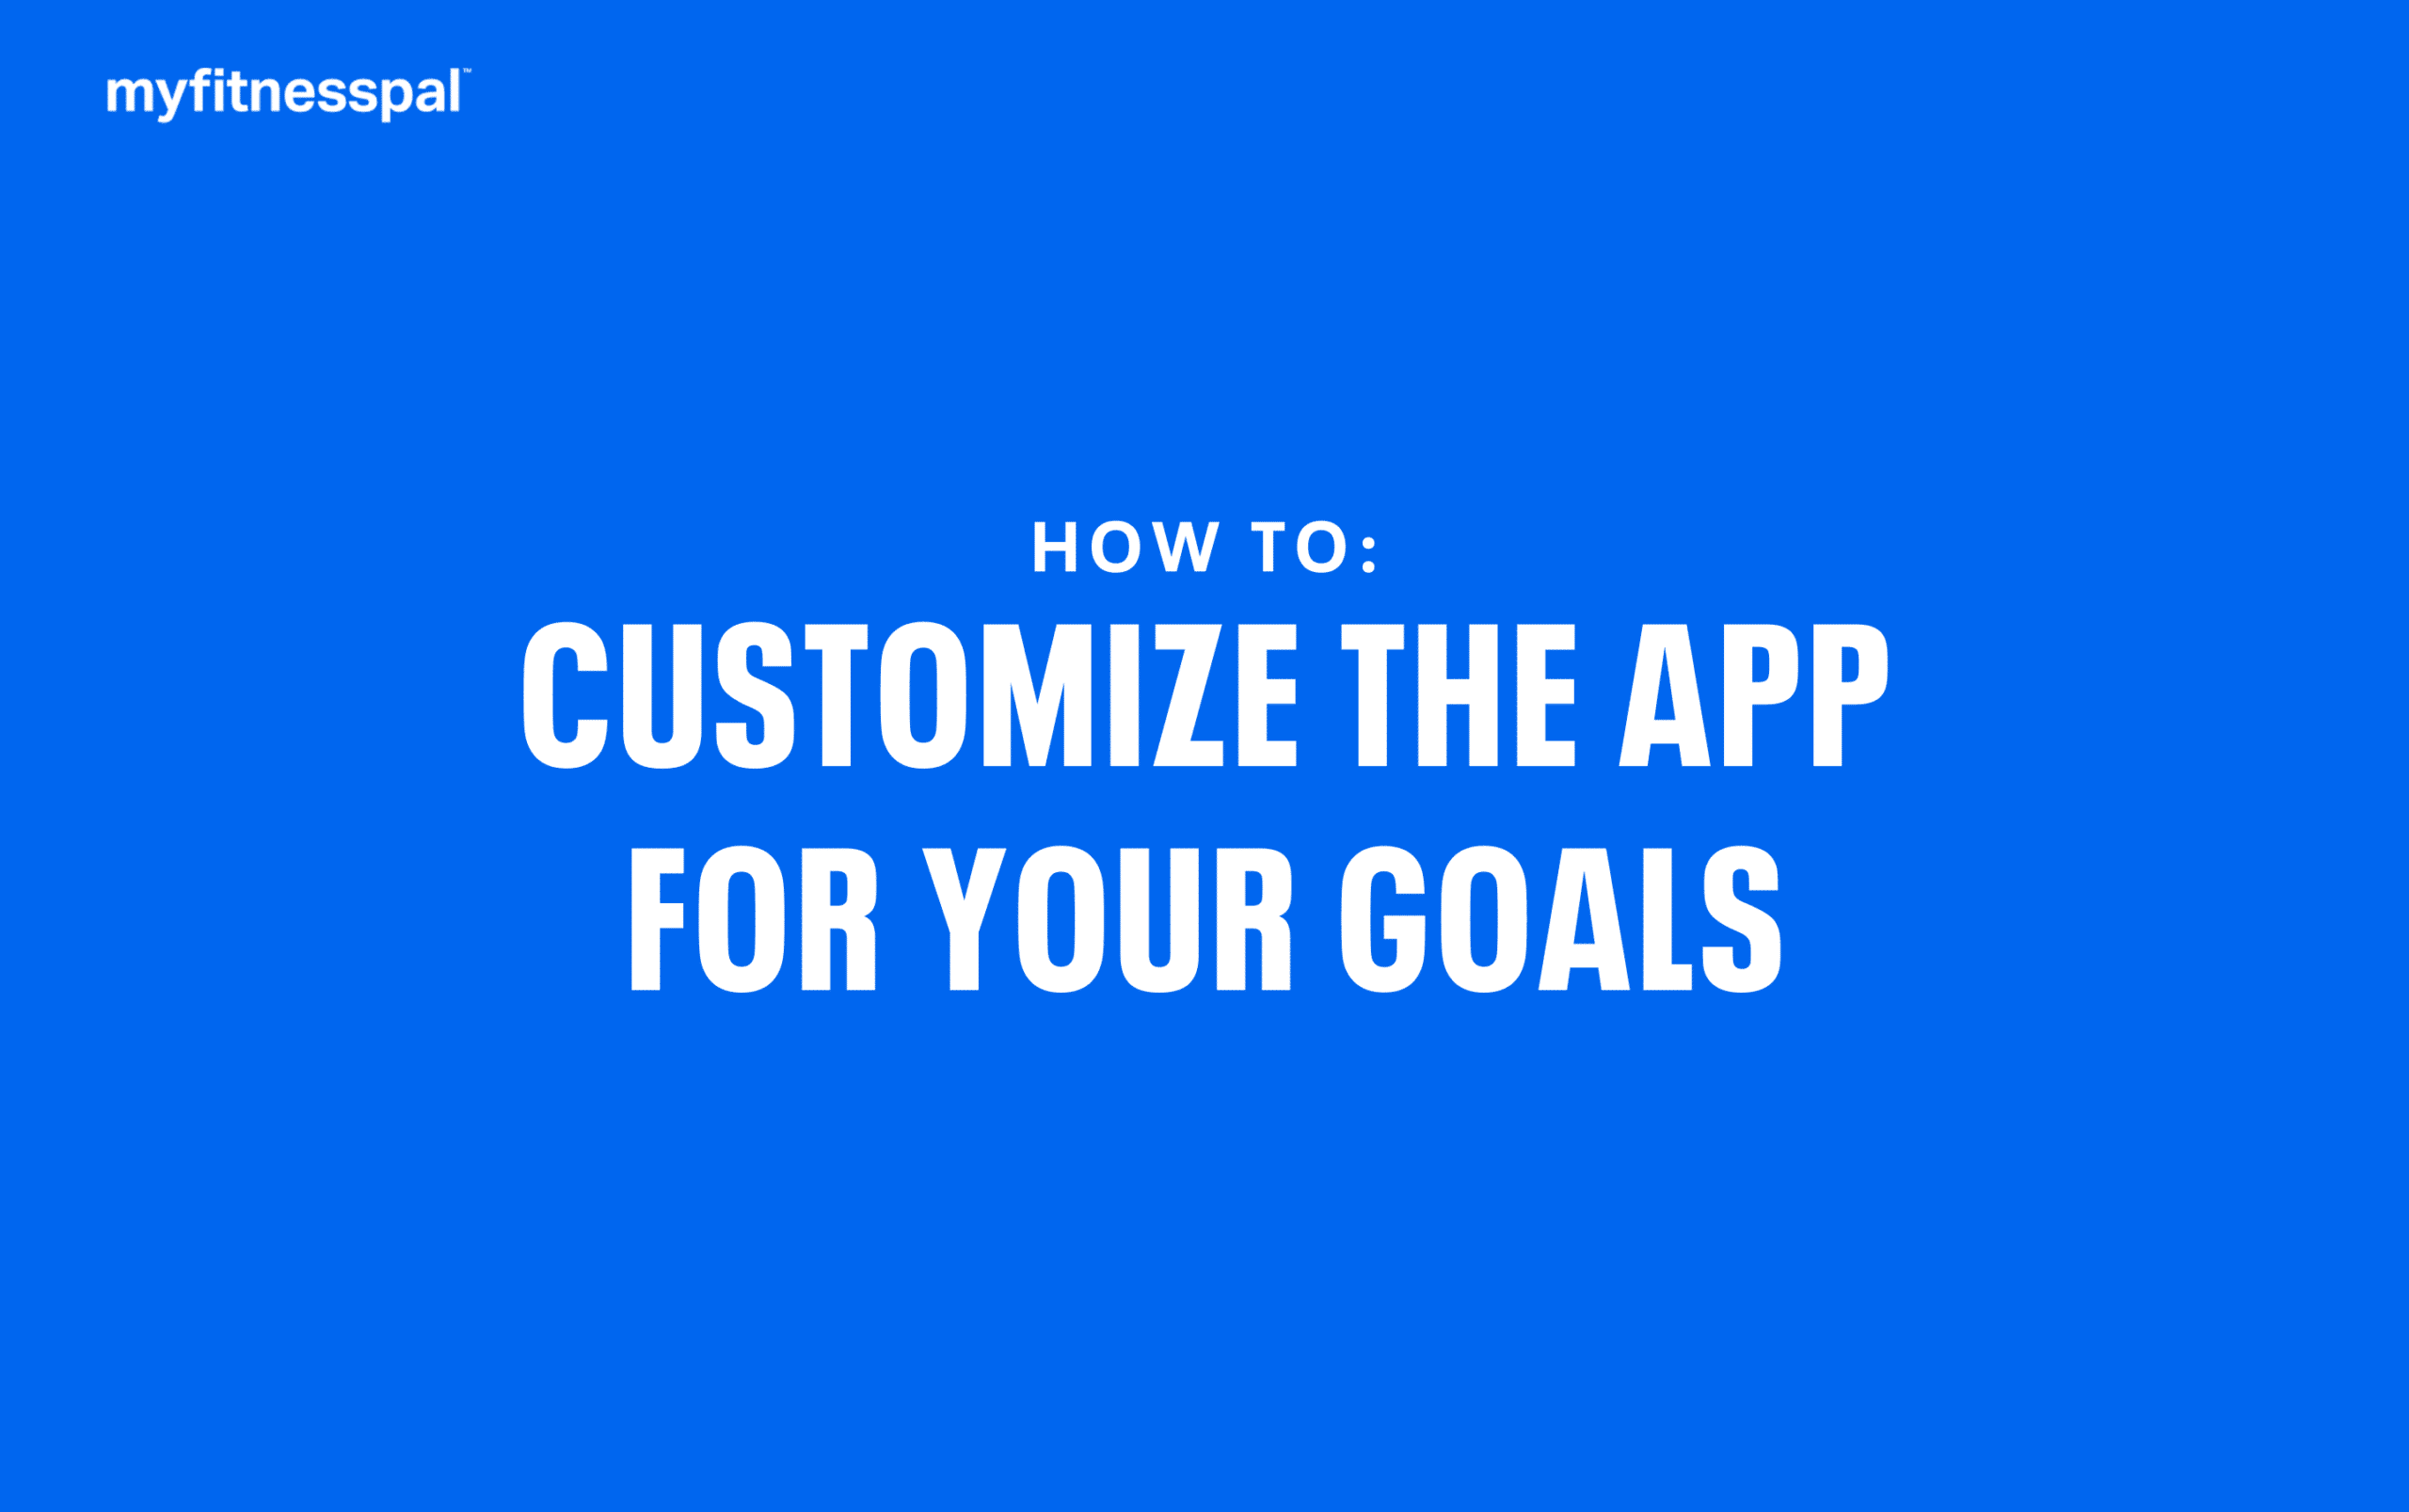 How to Customize the App for Your Goals